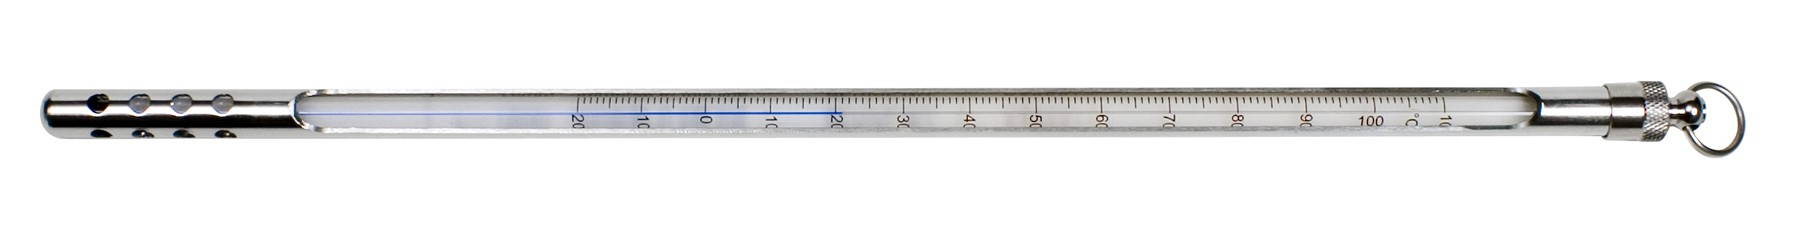 H-B DURAC Plus Armored Liquid-In-Glass Thermometer; -40 to 120F, 76mm Immersion, Organic Liquid Fill